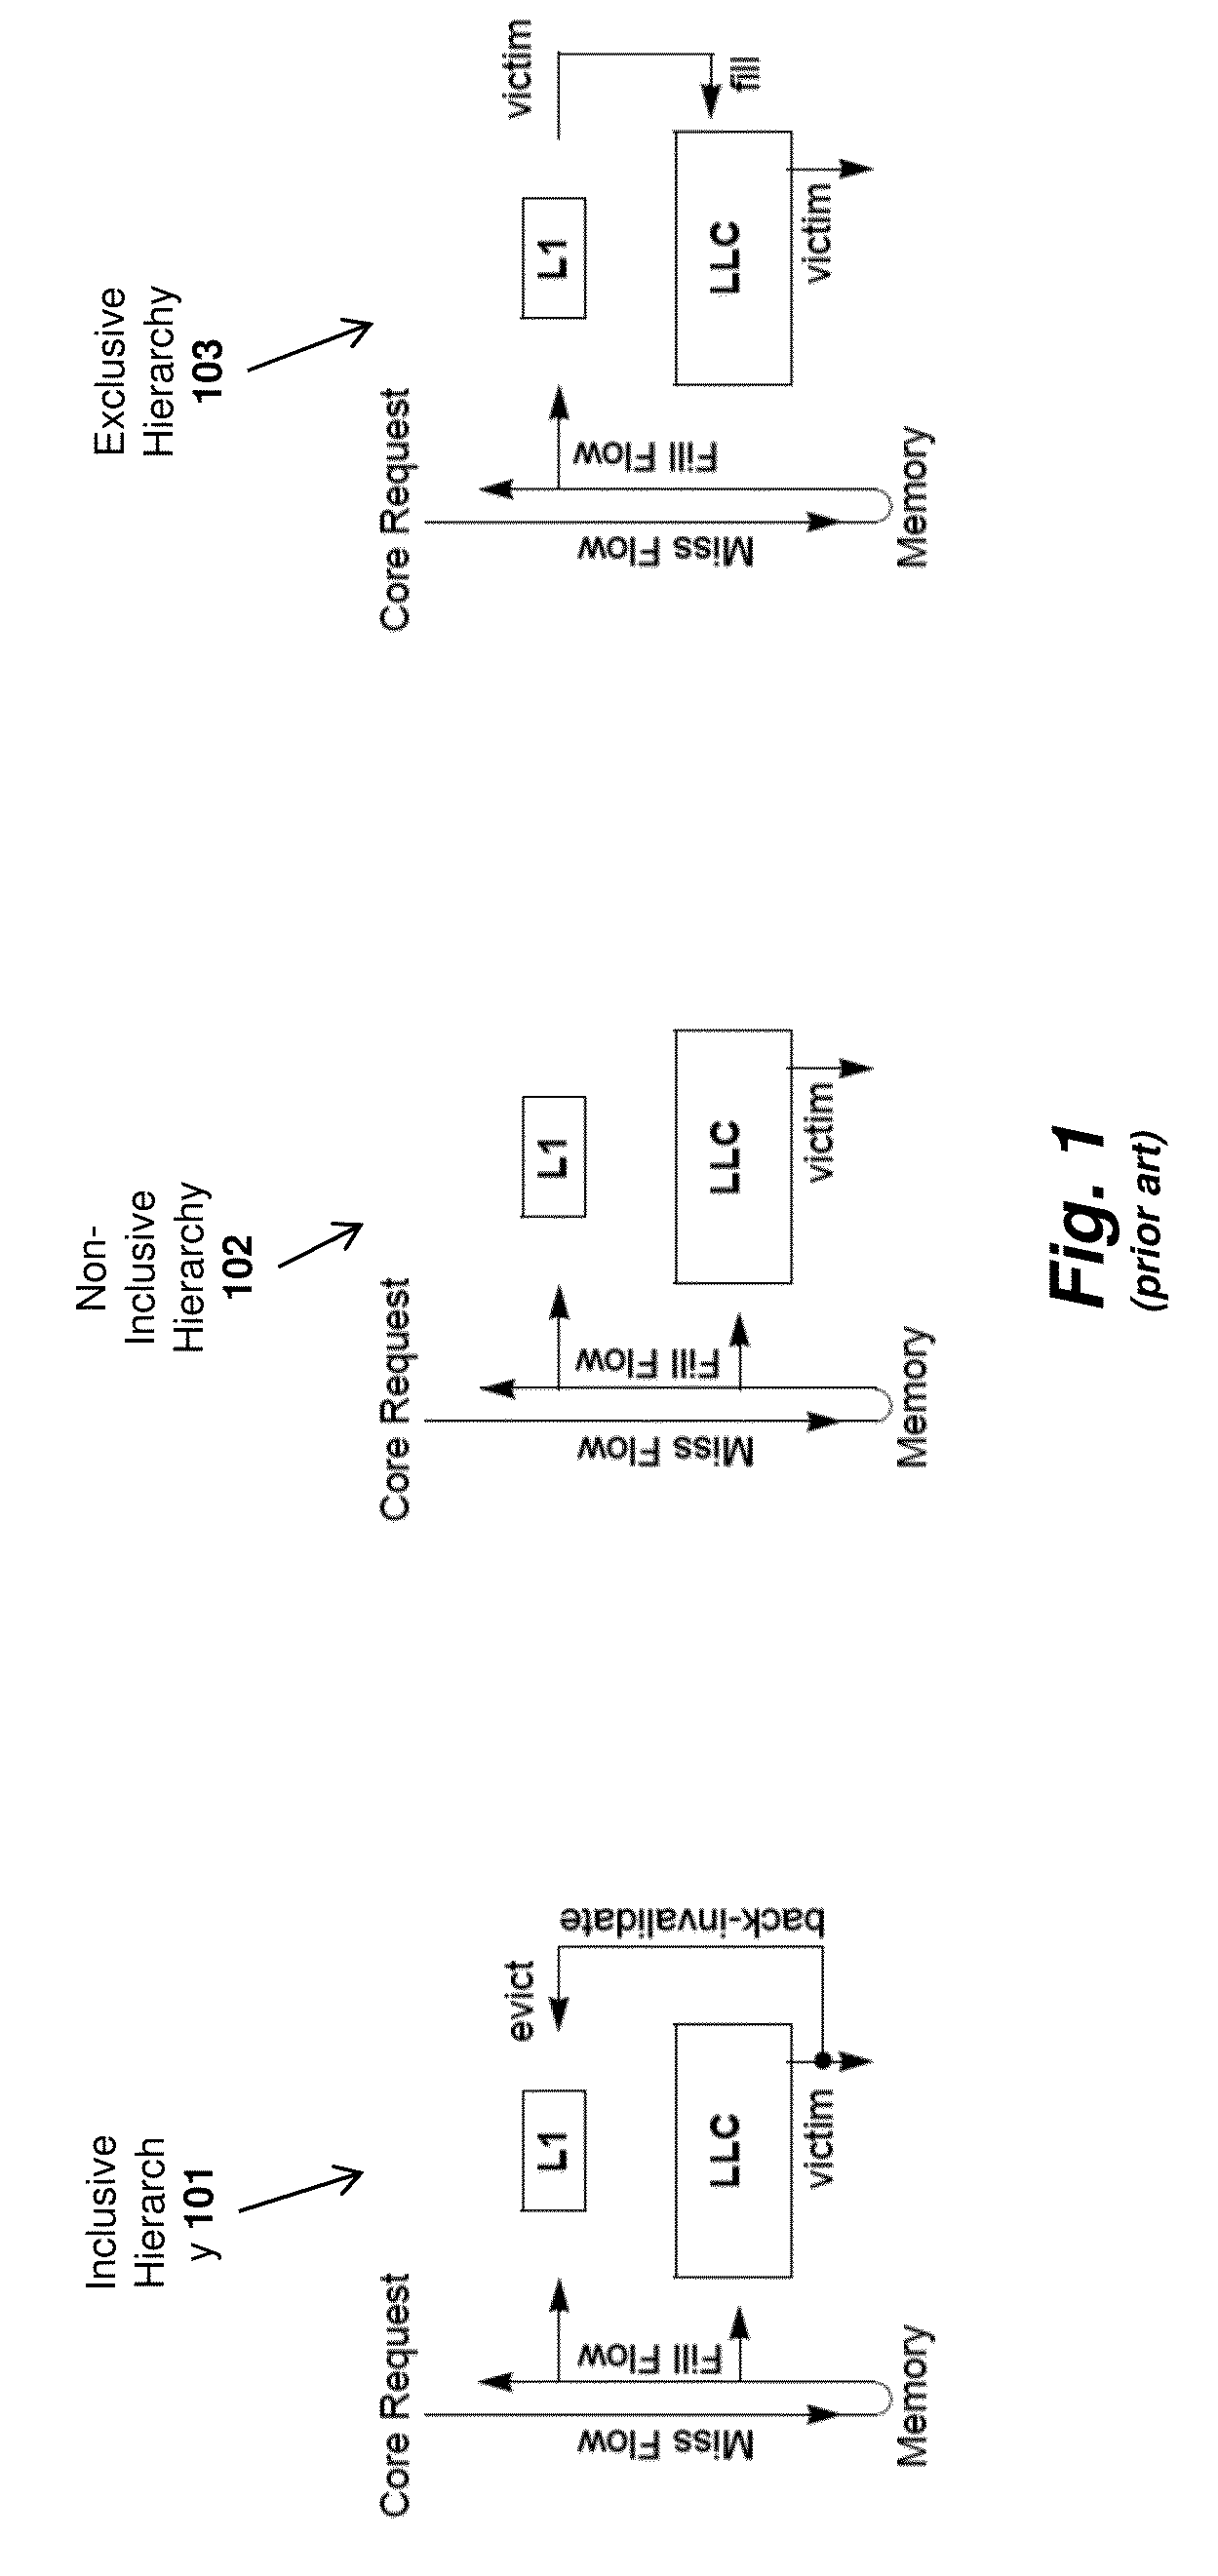 Method and apparatus for achieving non-inclusive cache performance with inclusive caches